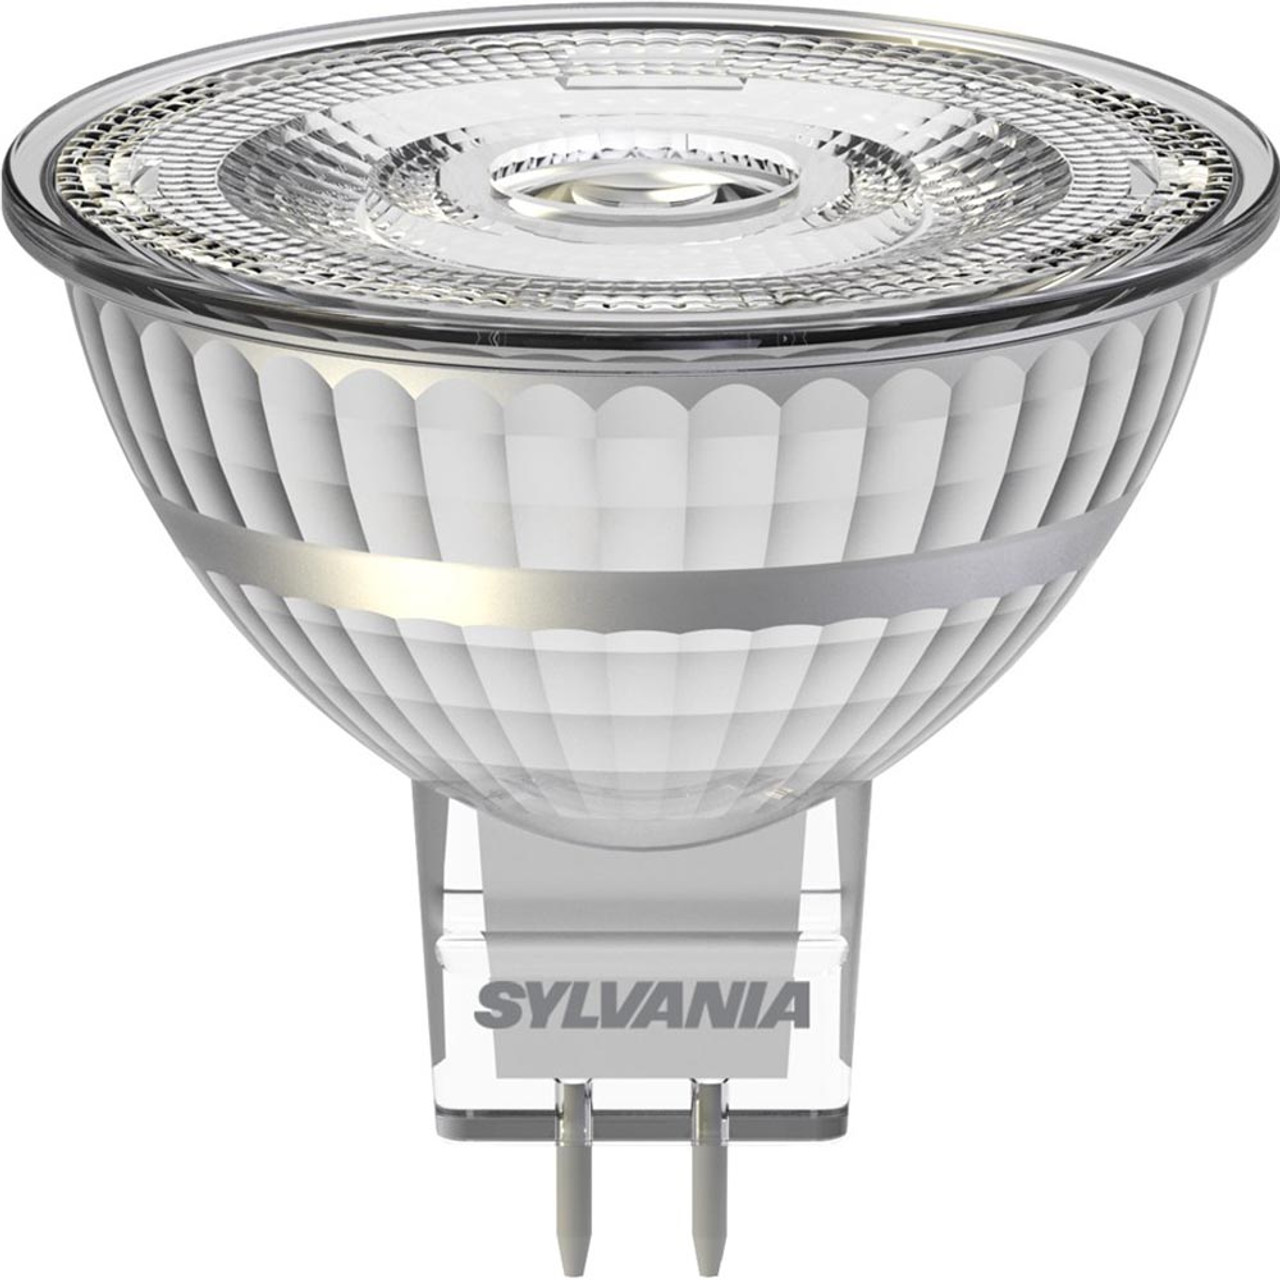 RefLED LED MR16 5.8W (40W) 4000K 12V 36 Degrees Dimmable